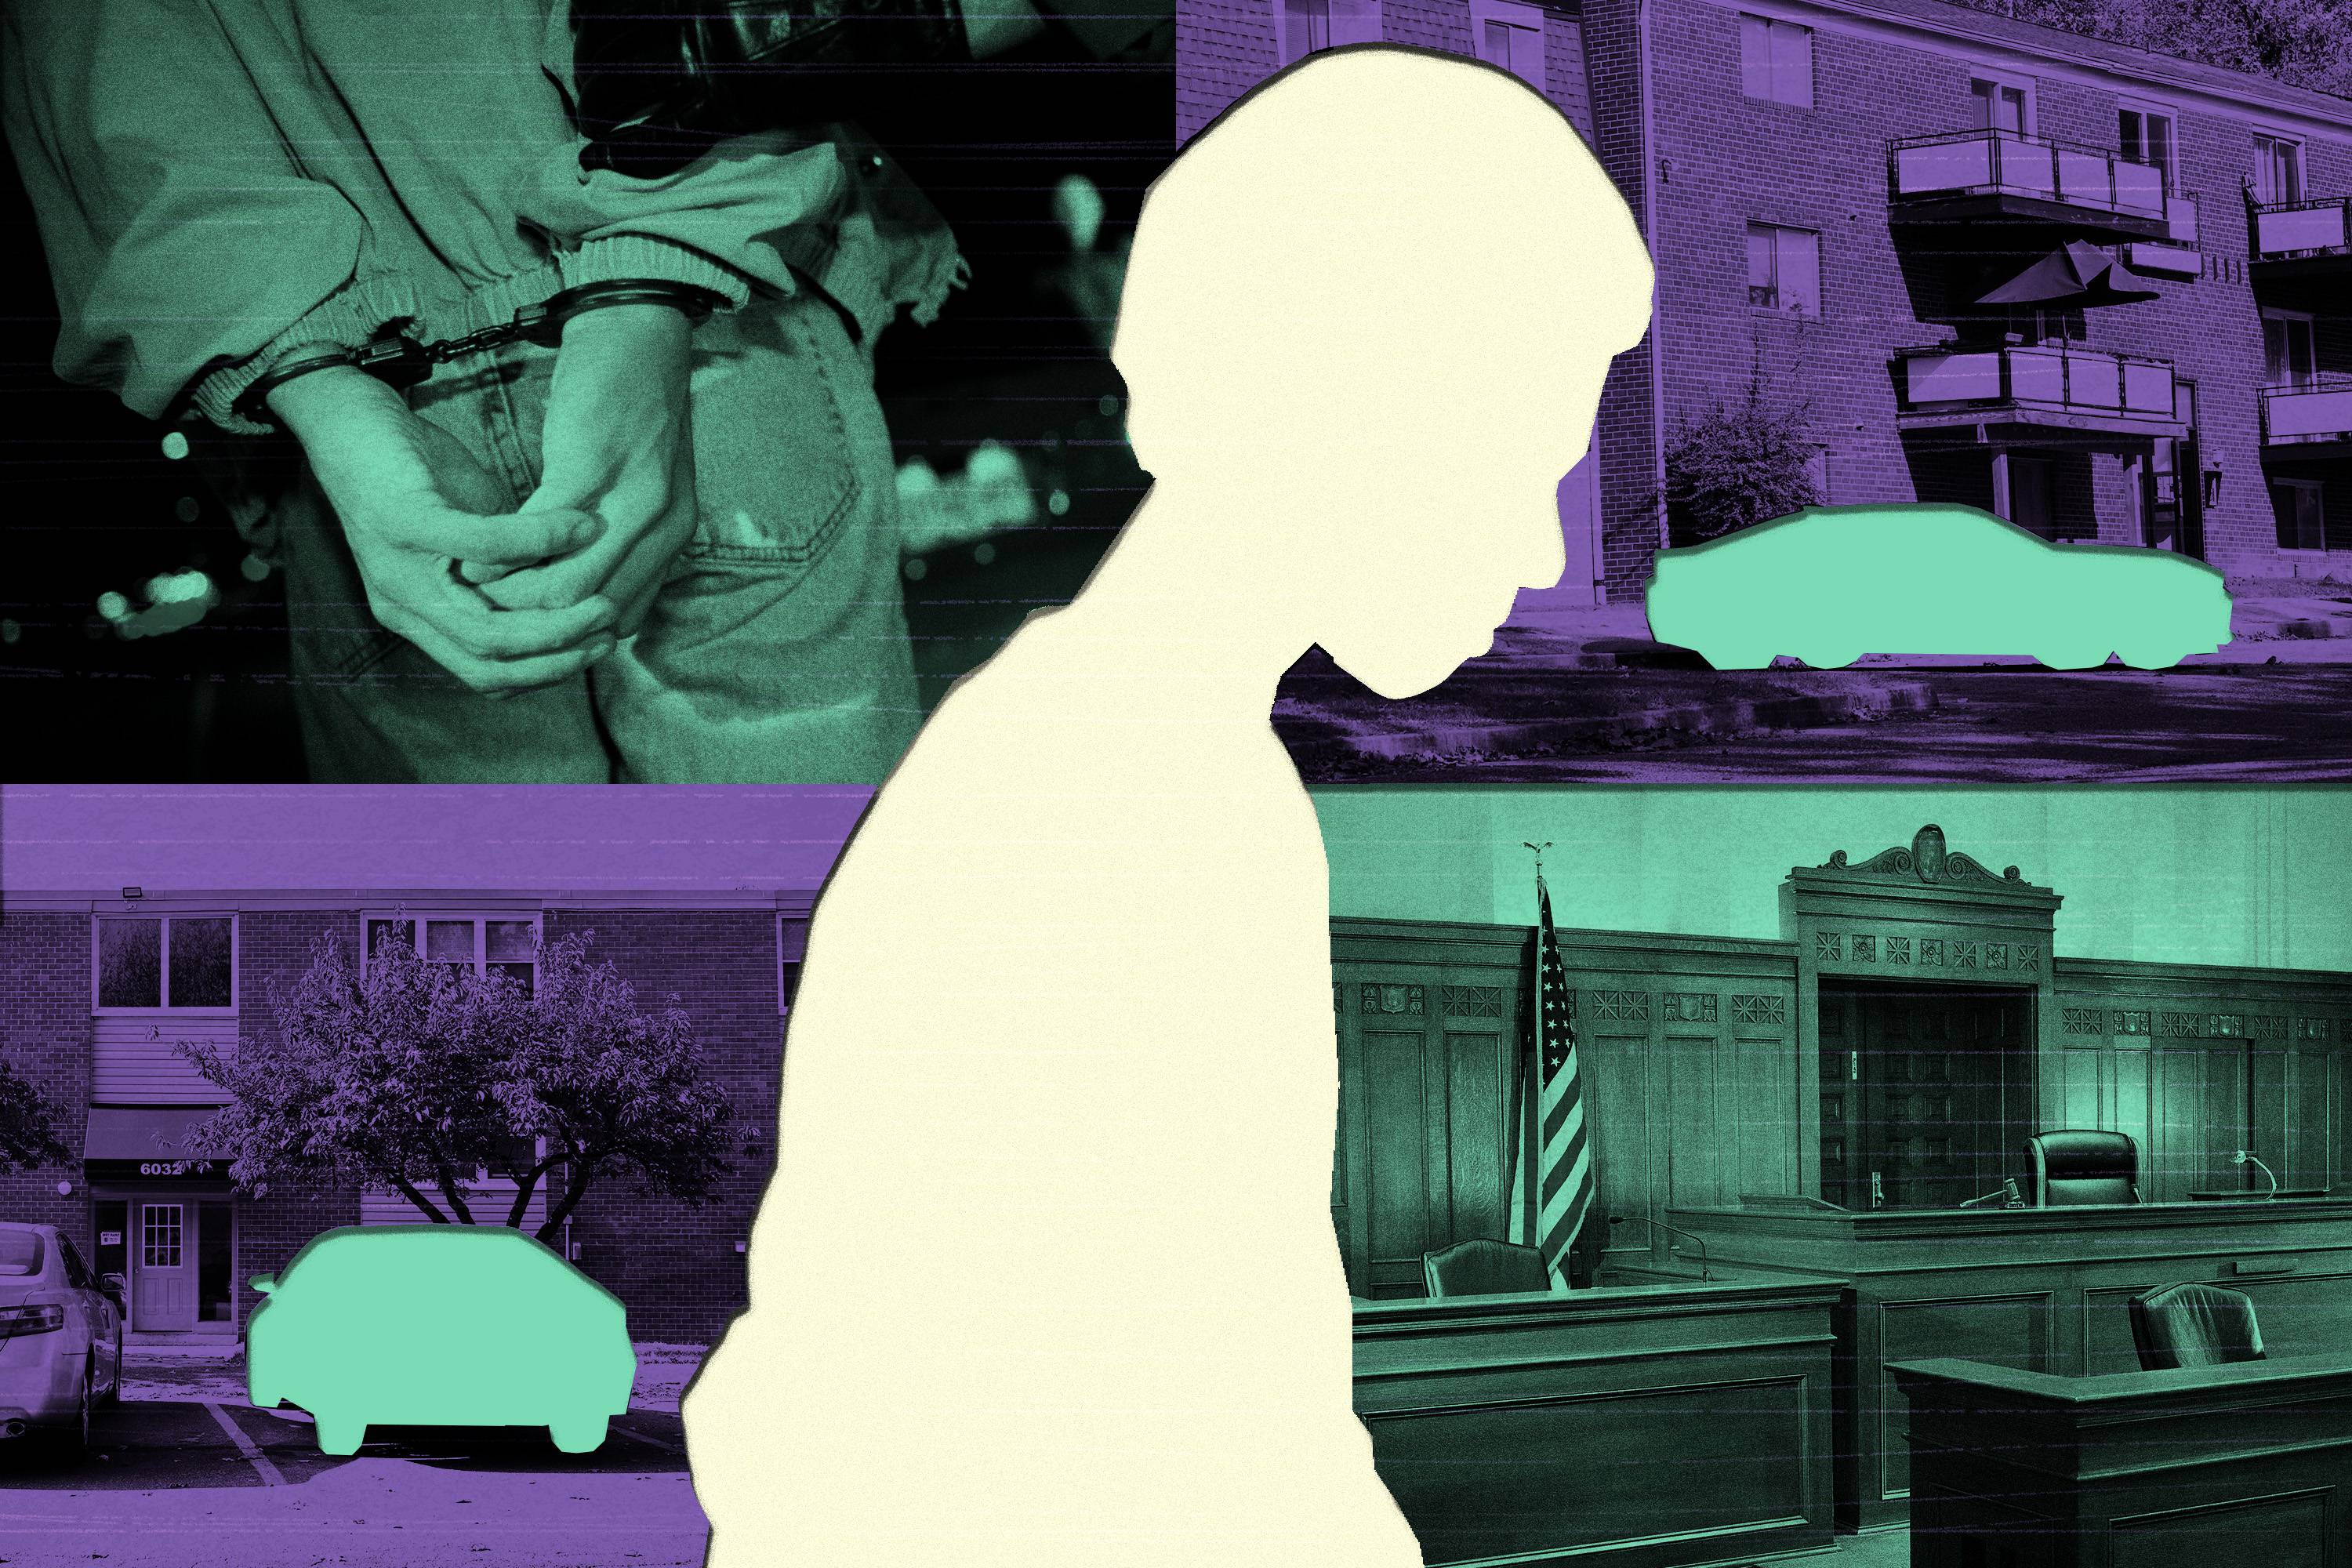 Photo illustration of silhouette of teenaged boy framed by four photos around him. Clockwise from top left: photo of young man with handcuffed arms behind his back; photo of apartment complex with parked car cut out of image; photo of inside of empty courtroom; photo of apartment complex with parked car cut out of image.